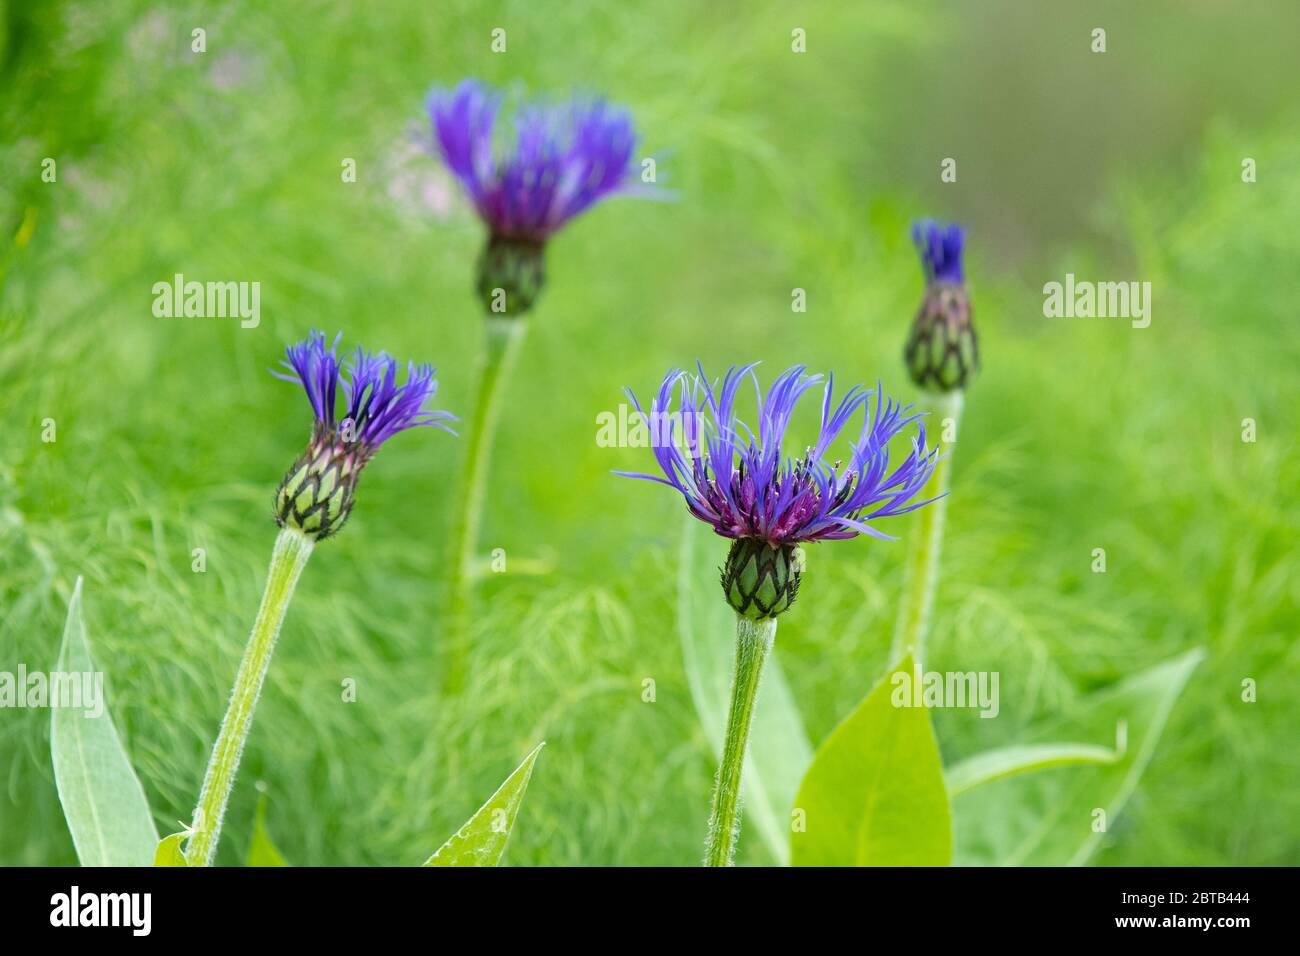 centaurea montana or knapweed  growing in late spring early summer against fennel   UK Stock Photo